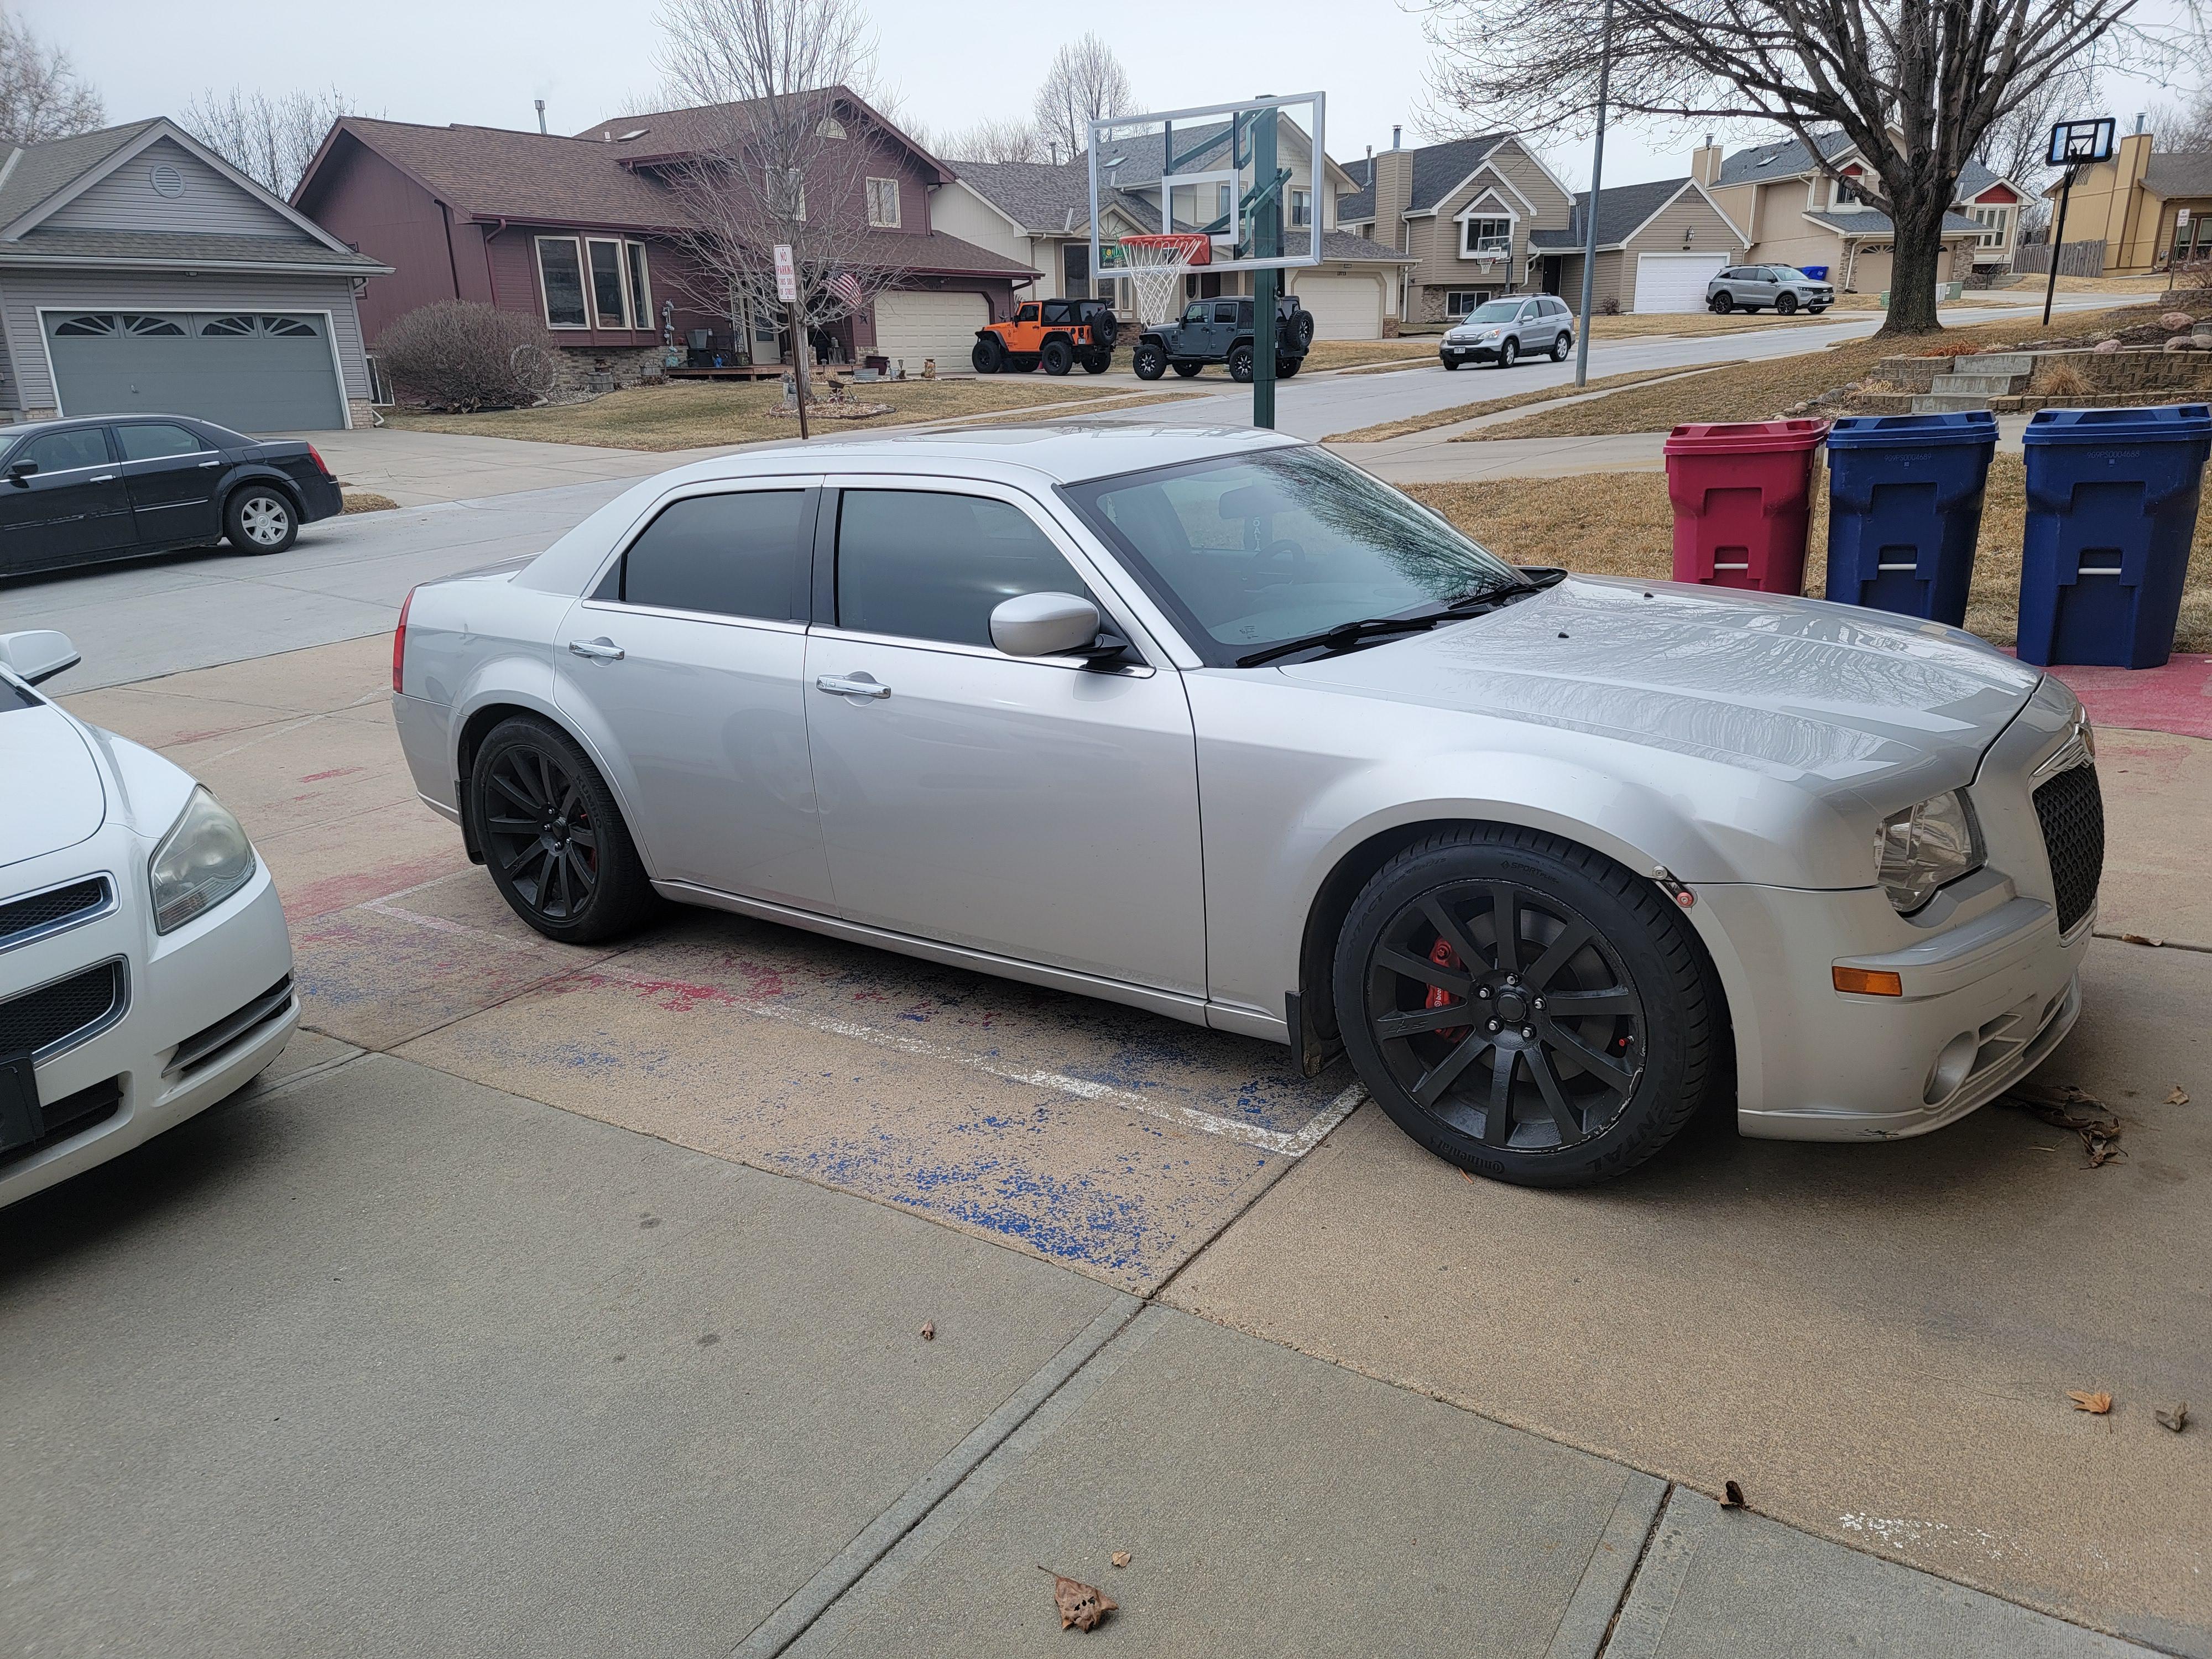 My new baby, 2010 Chrysler 300 SRT8, as you can see in the back I also have  another 2005 Chryslee 300 Touring which I've owned for the last 13 years.  I've always